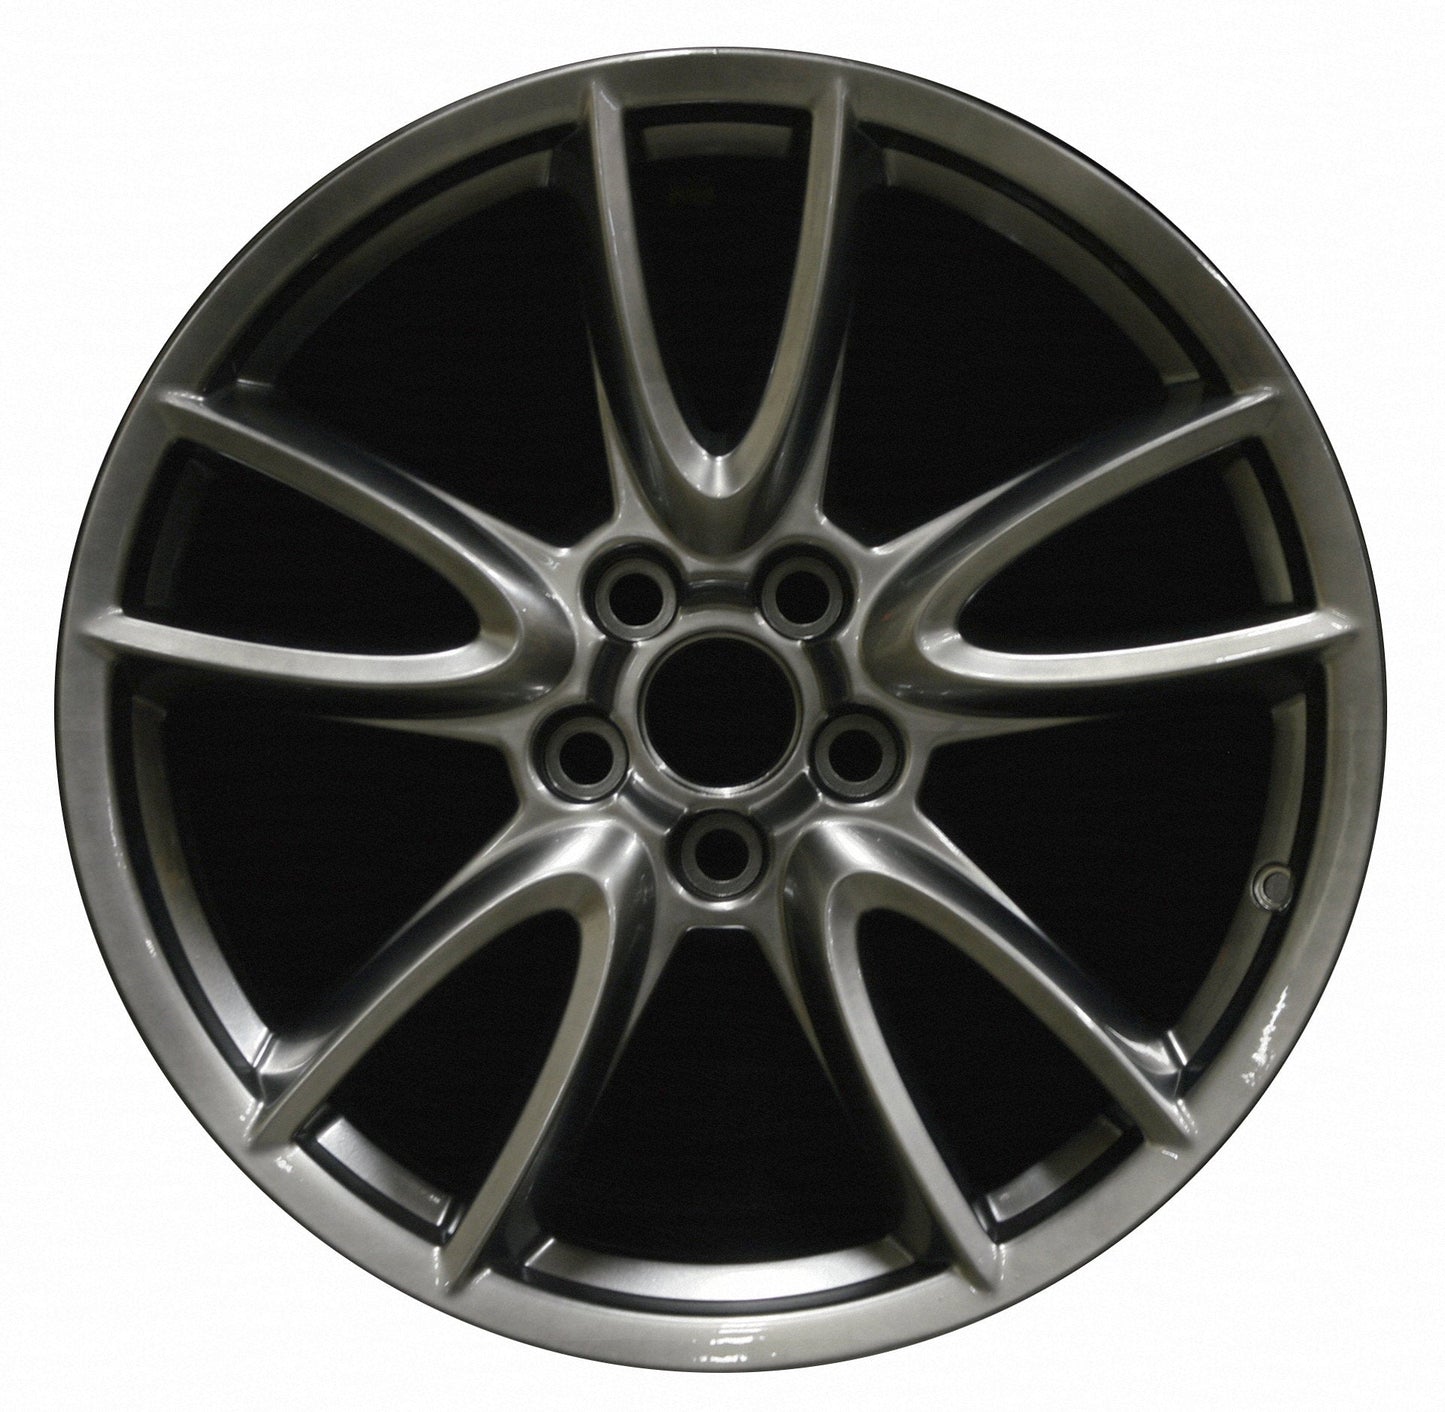 Ford Mustang  2011, 2012, 2013, 2014 Factory OEM Car Wheel Size 19x9 Alloy WAO.3862.HYPV3.FFBRT